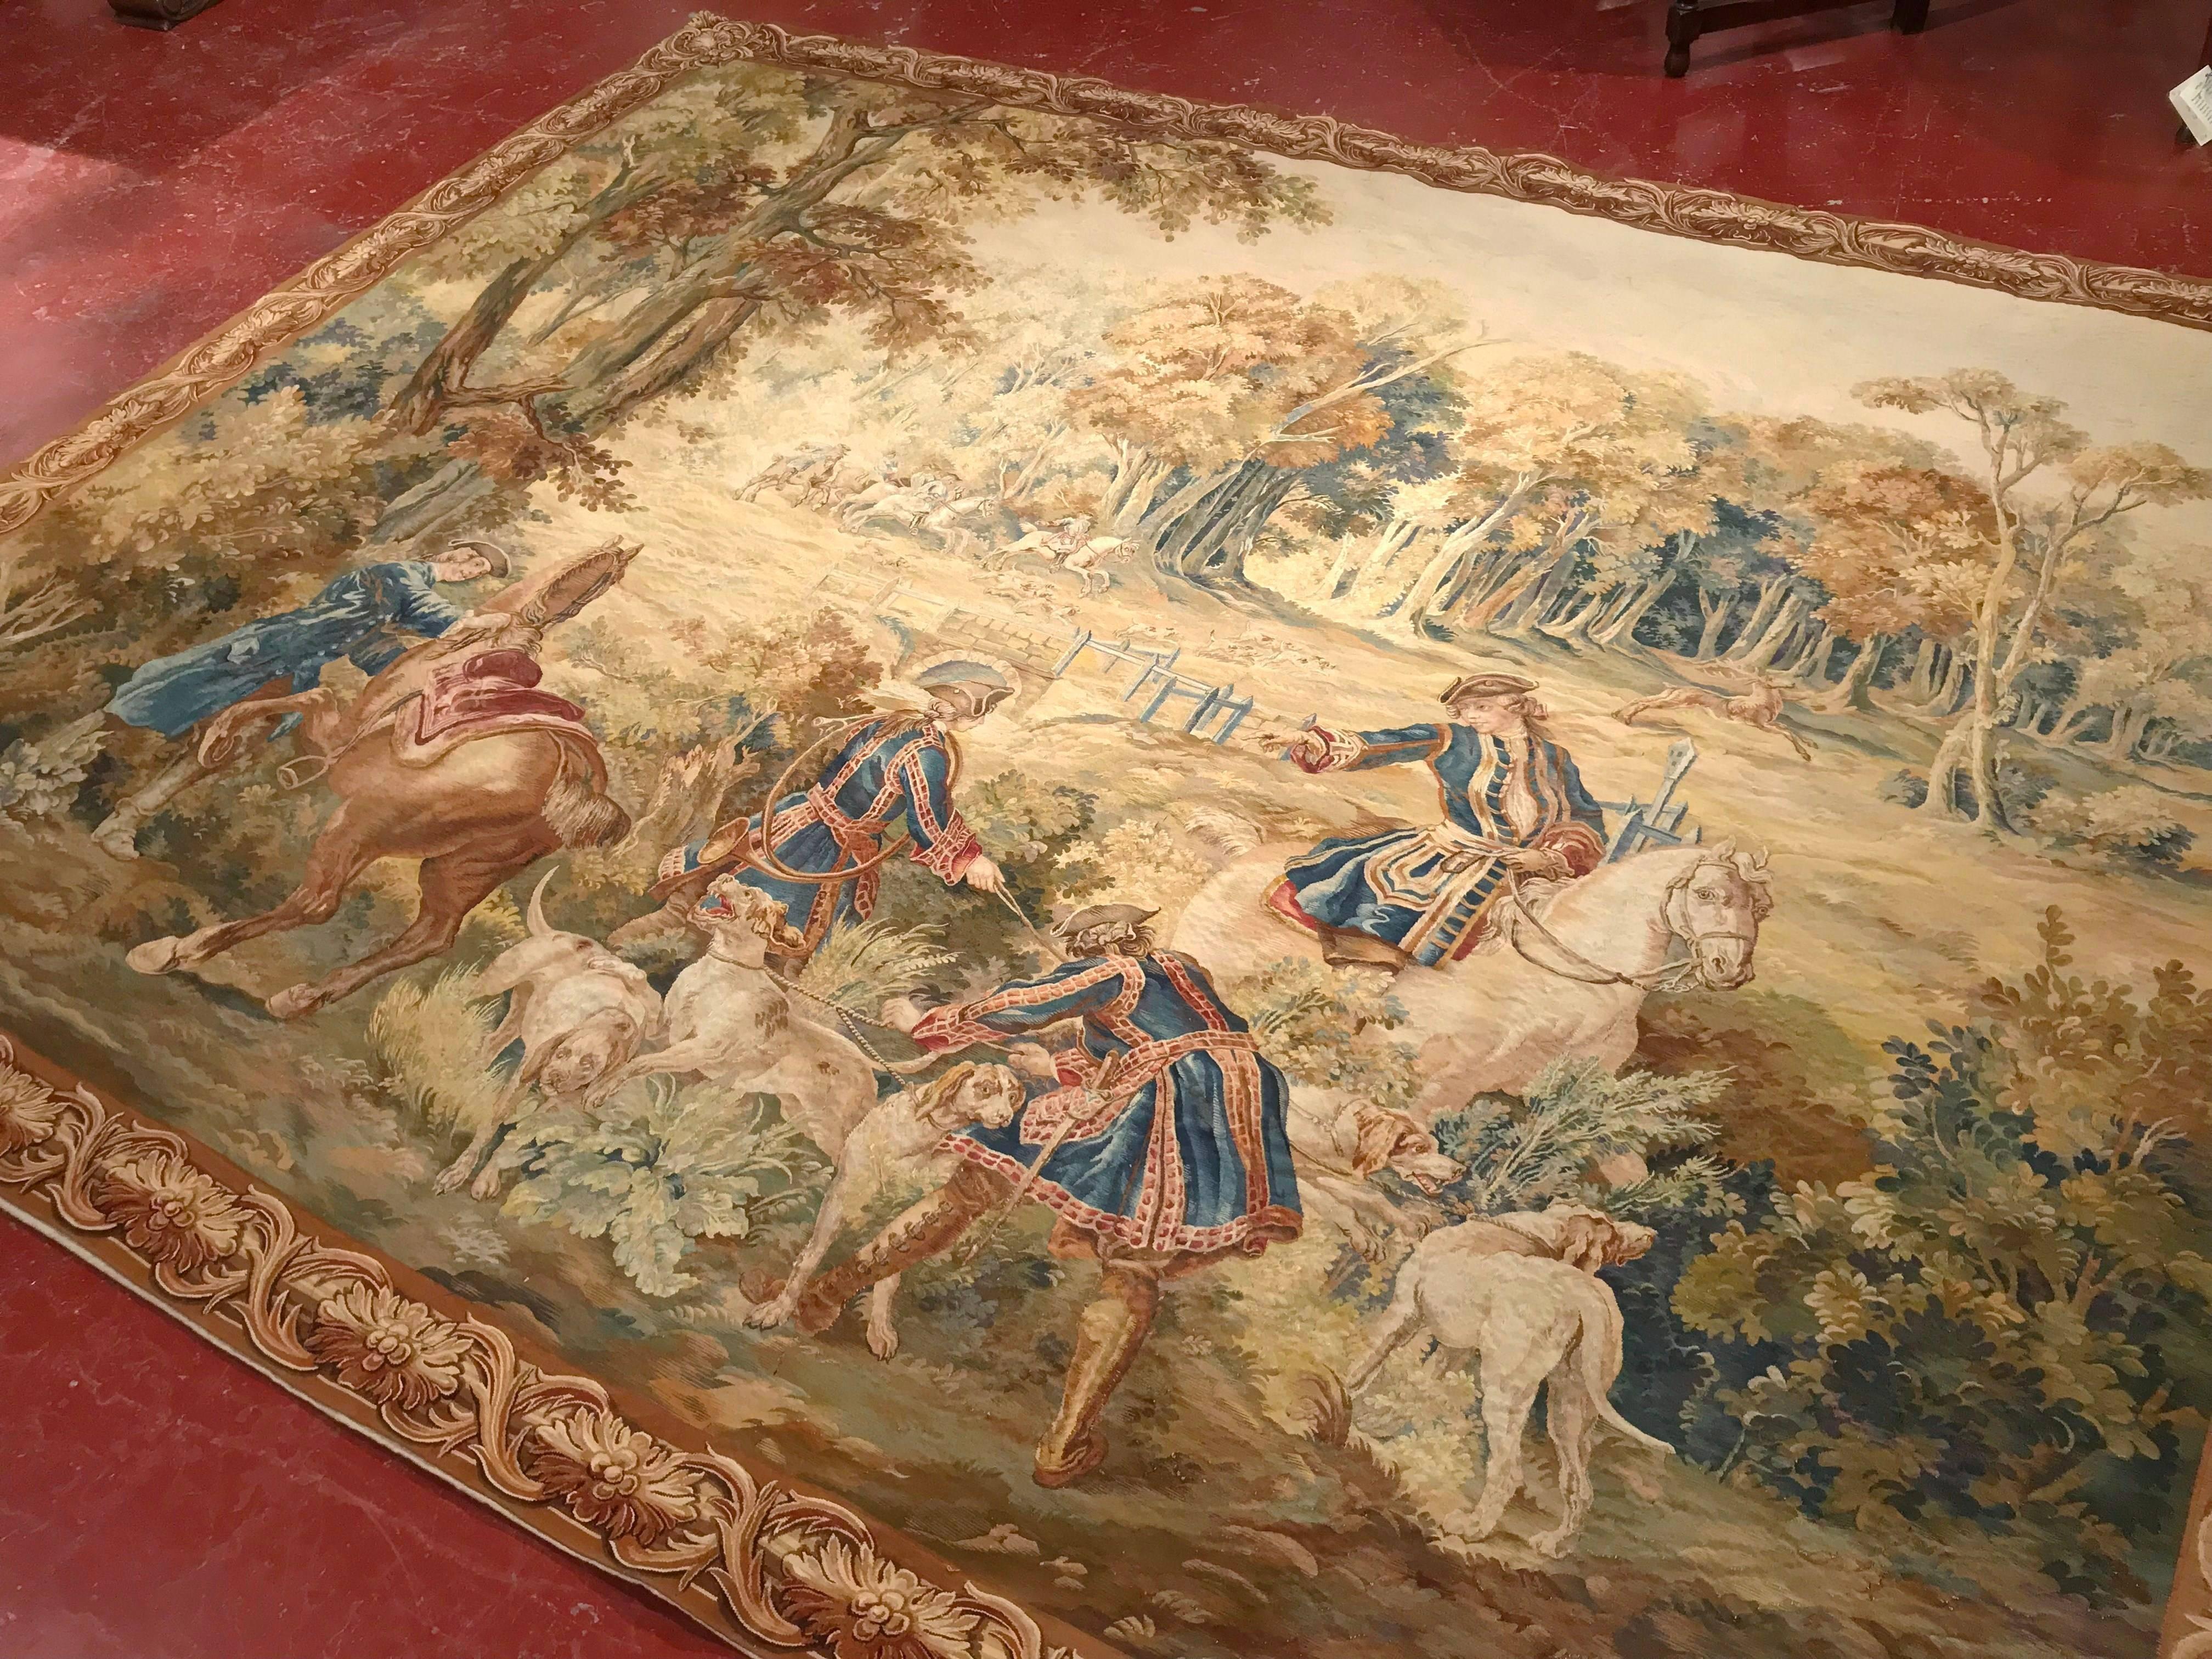 Hand-Woven Large 18th Century Hunt Scene Tapestry with Horsemen Dogs and Deer from Brussels